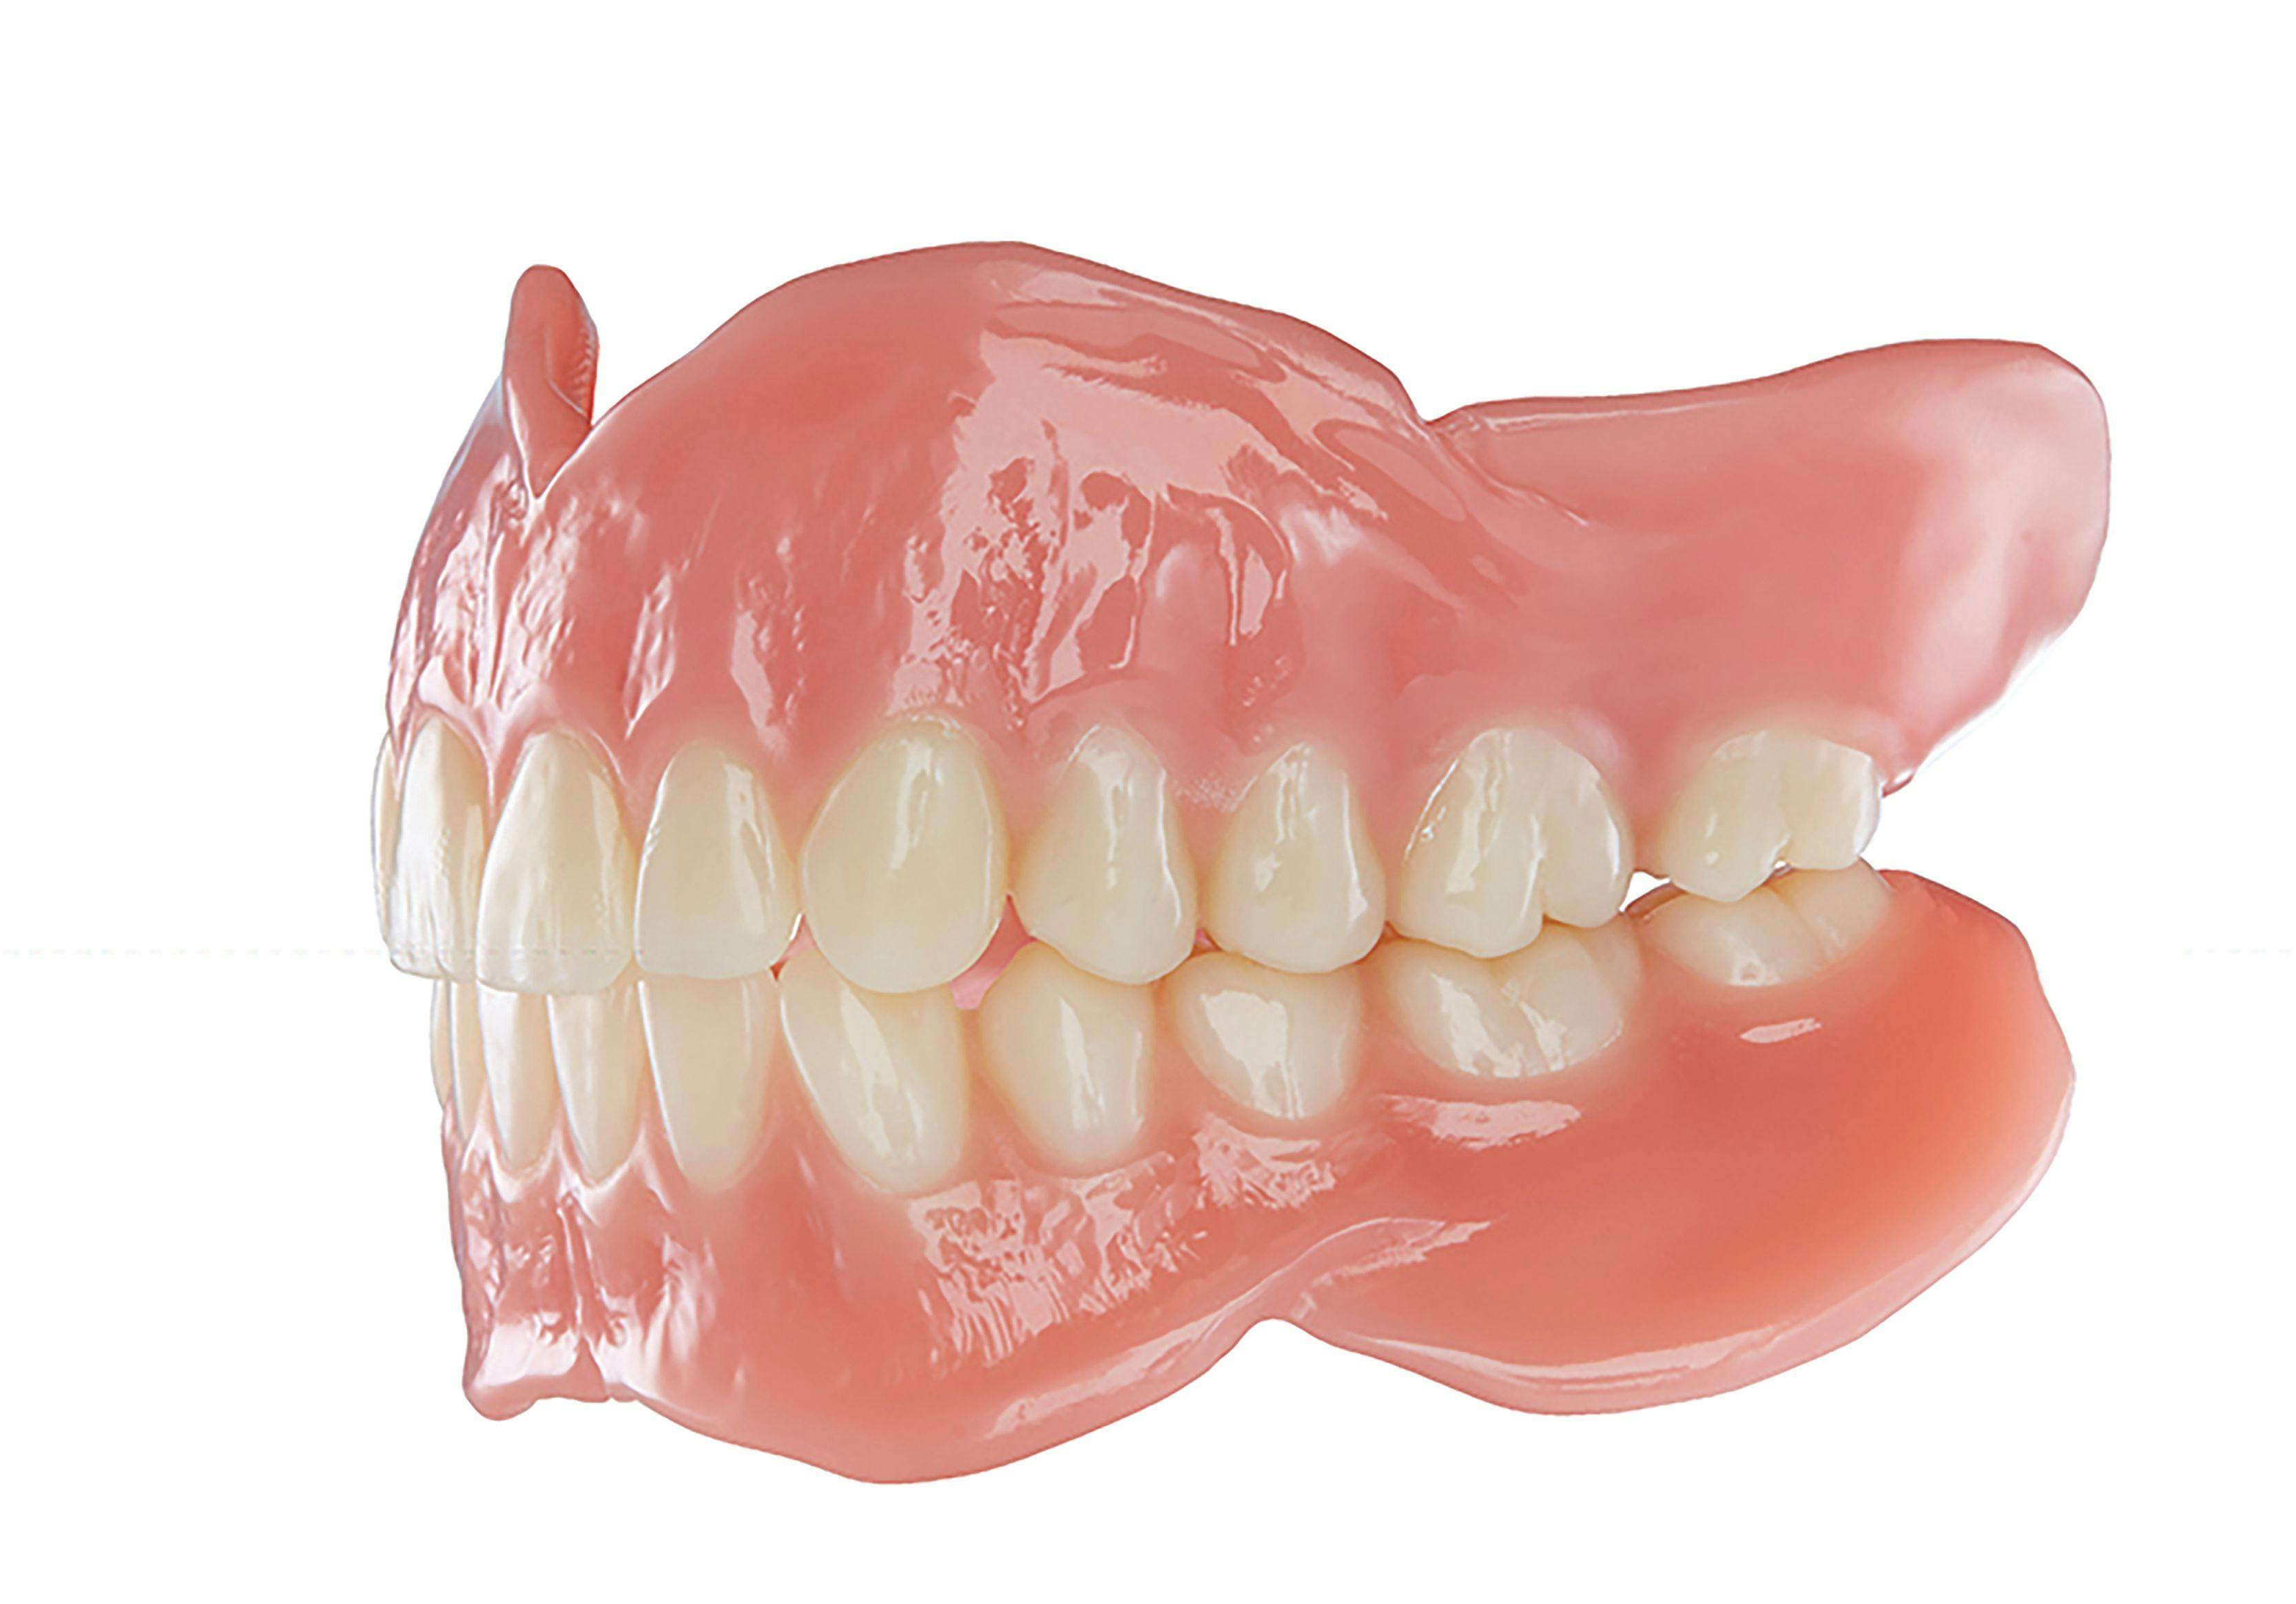 A set of dentures completed using the Baltic Denture System.